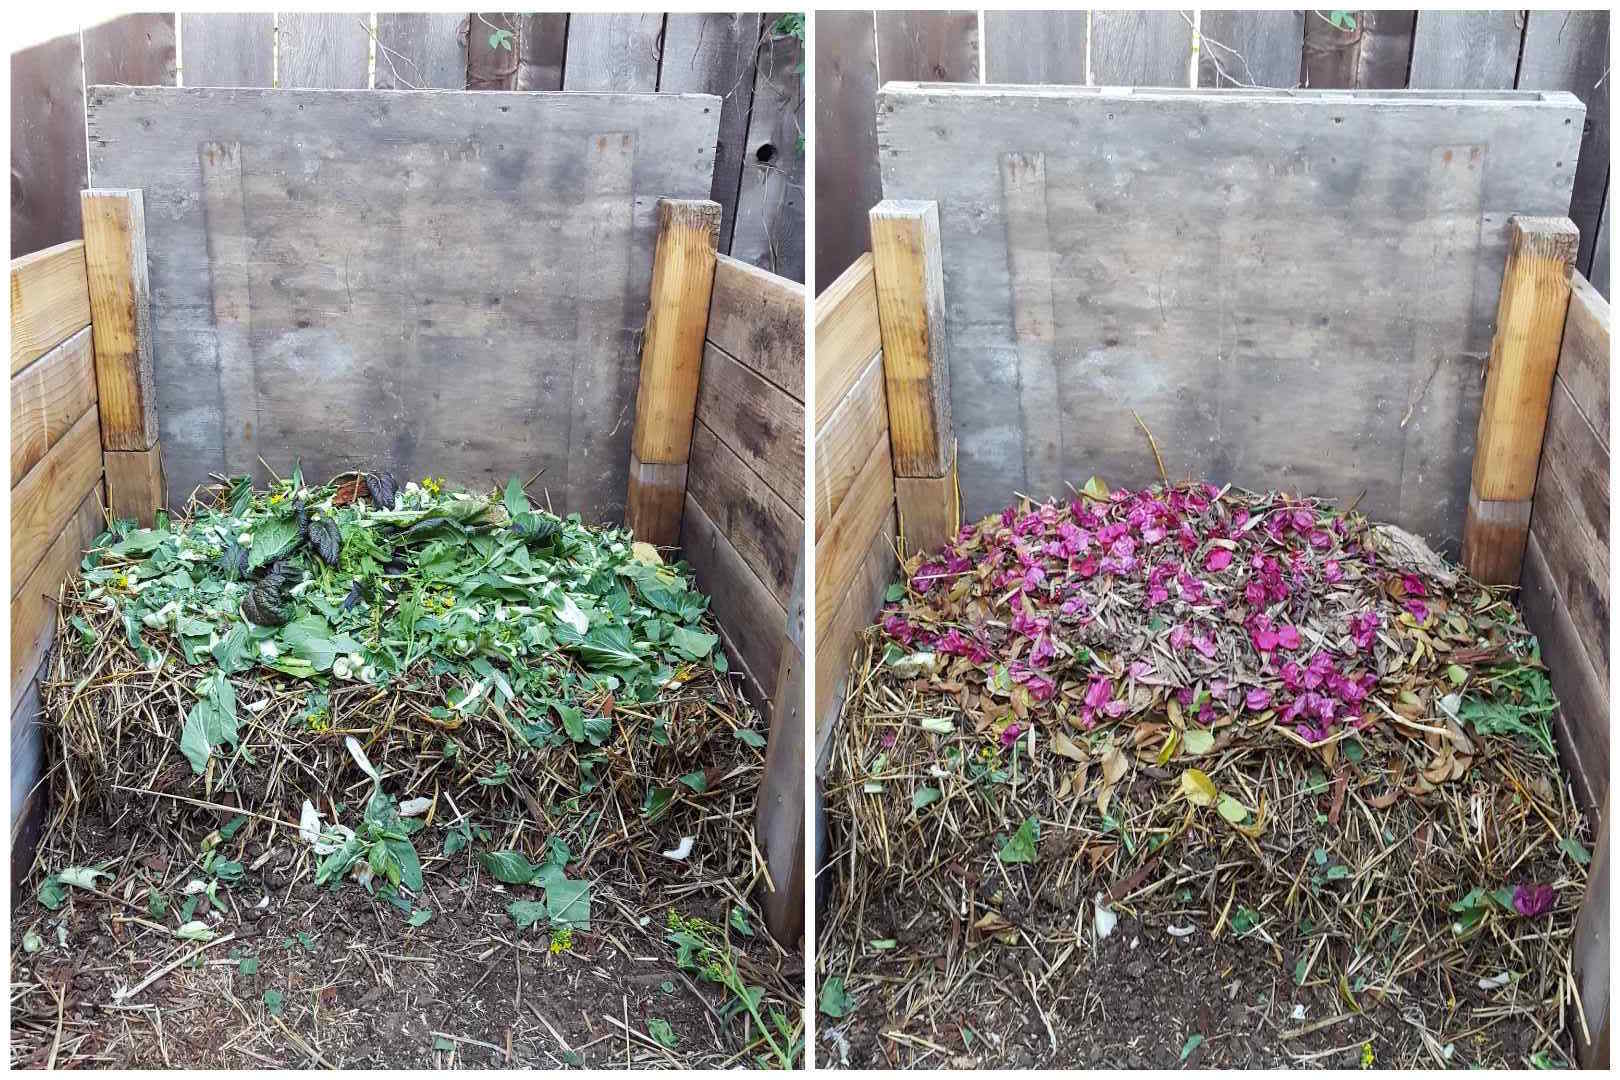 A two part image collage as a before and after photo. In the first image, a single compartment compost bin has a layer of green (nitrogen) plant material on the top layer. The second image shows the bin after a layer of brown (carbon) plant material has been layered on top of the previous green layer. One would continue to build the pile in this fashion to make compost. 